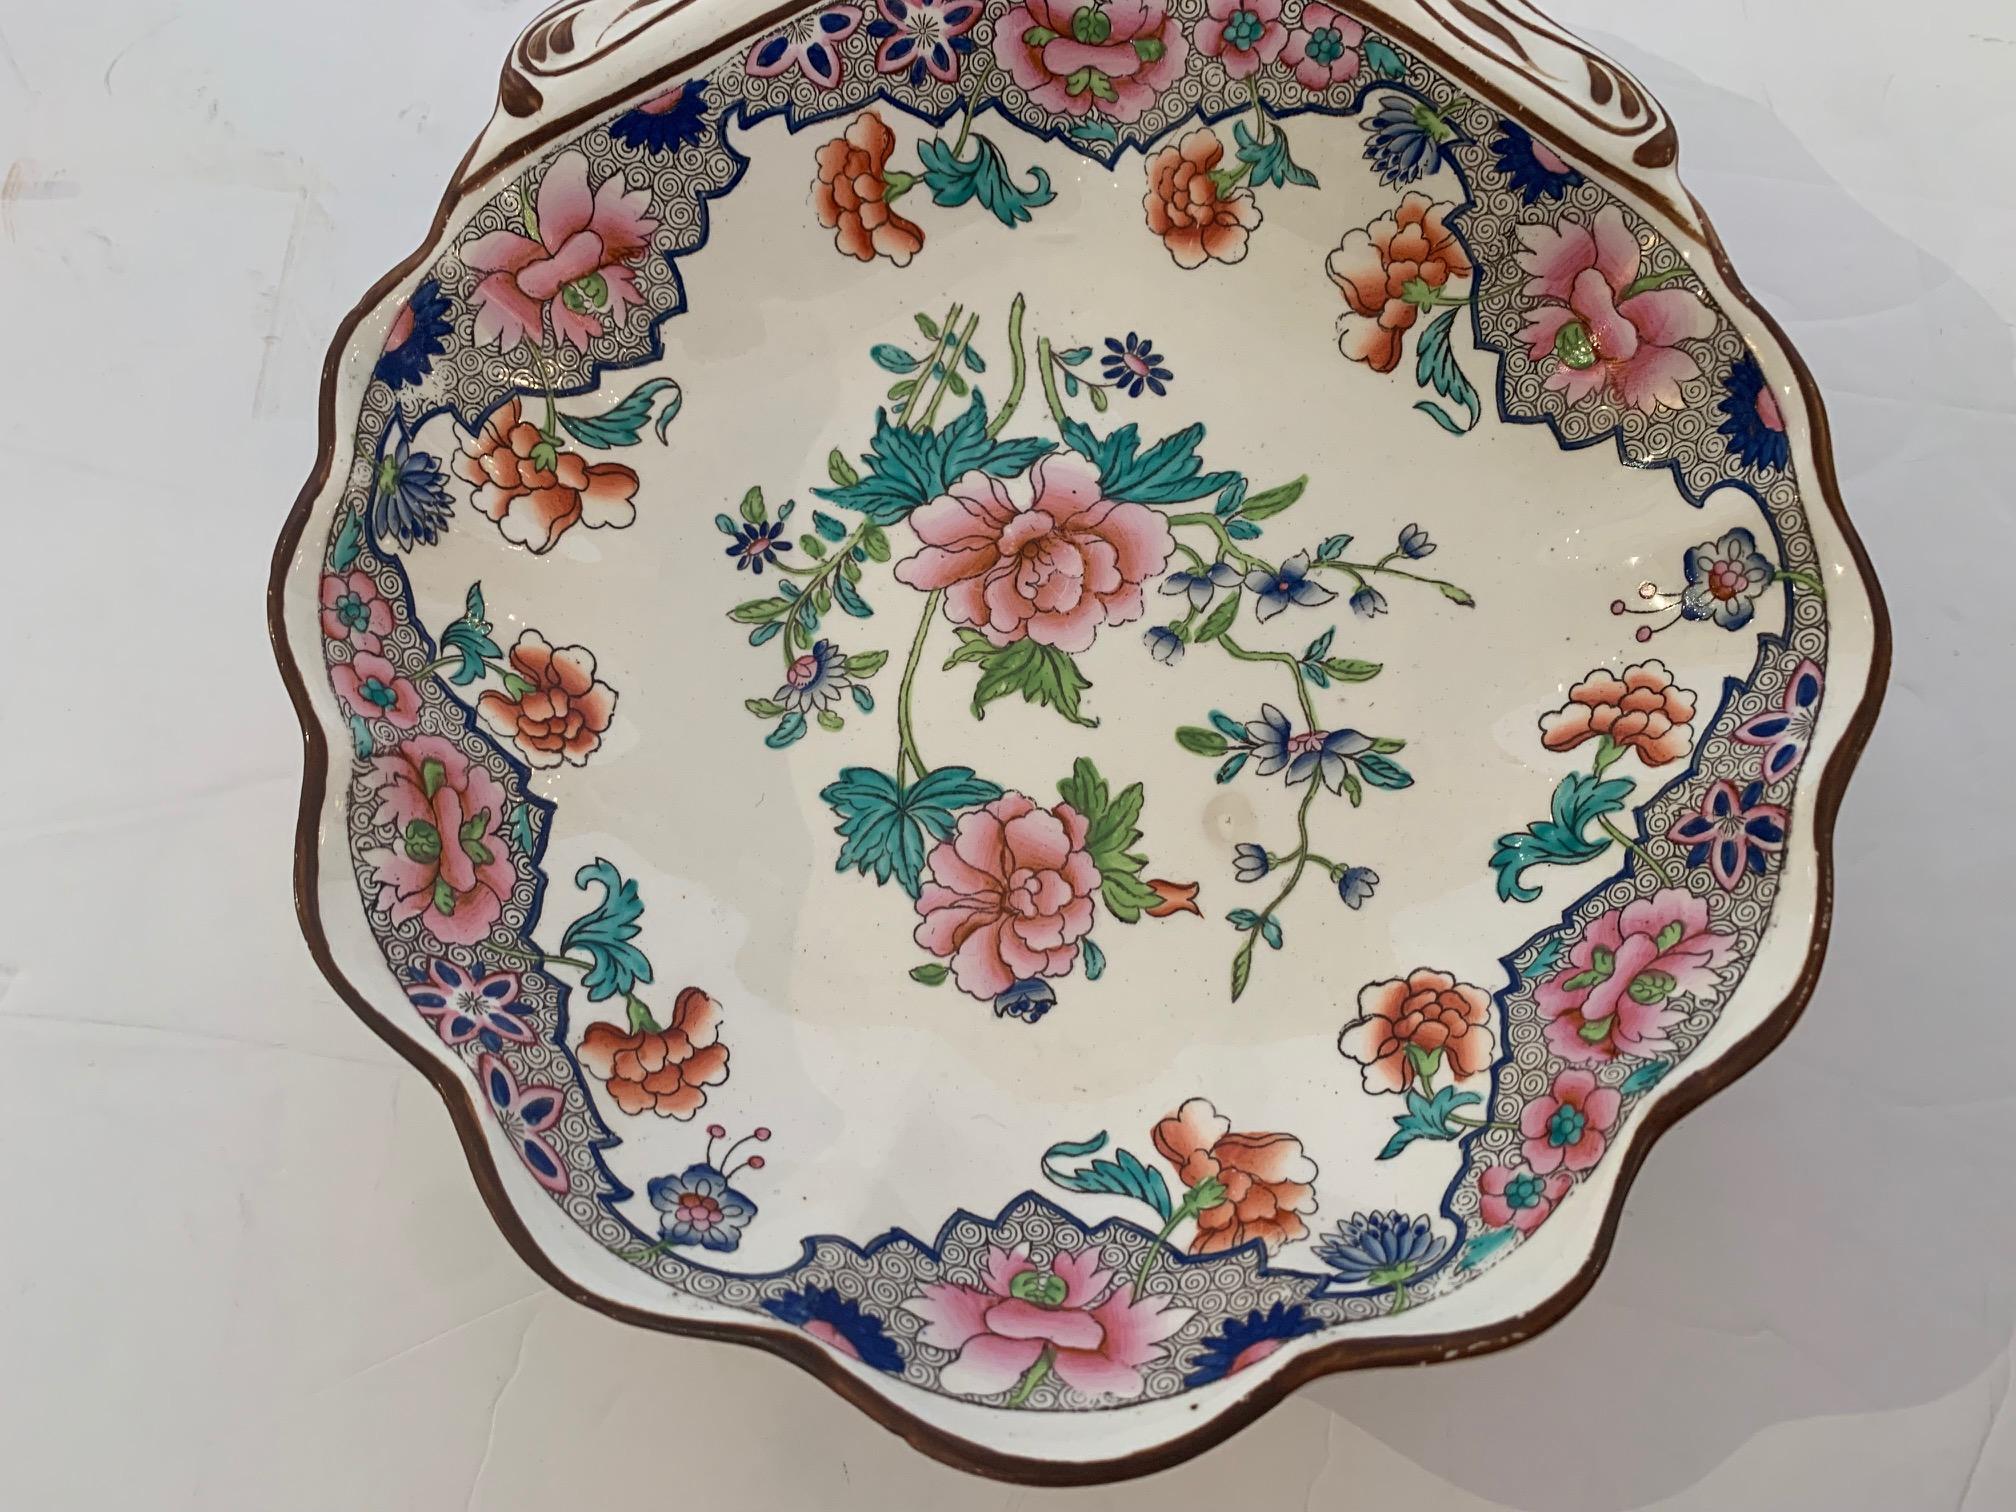 A lovely scalloped edge Spode serving dish having floral decoration and gold leaf embellishments.